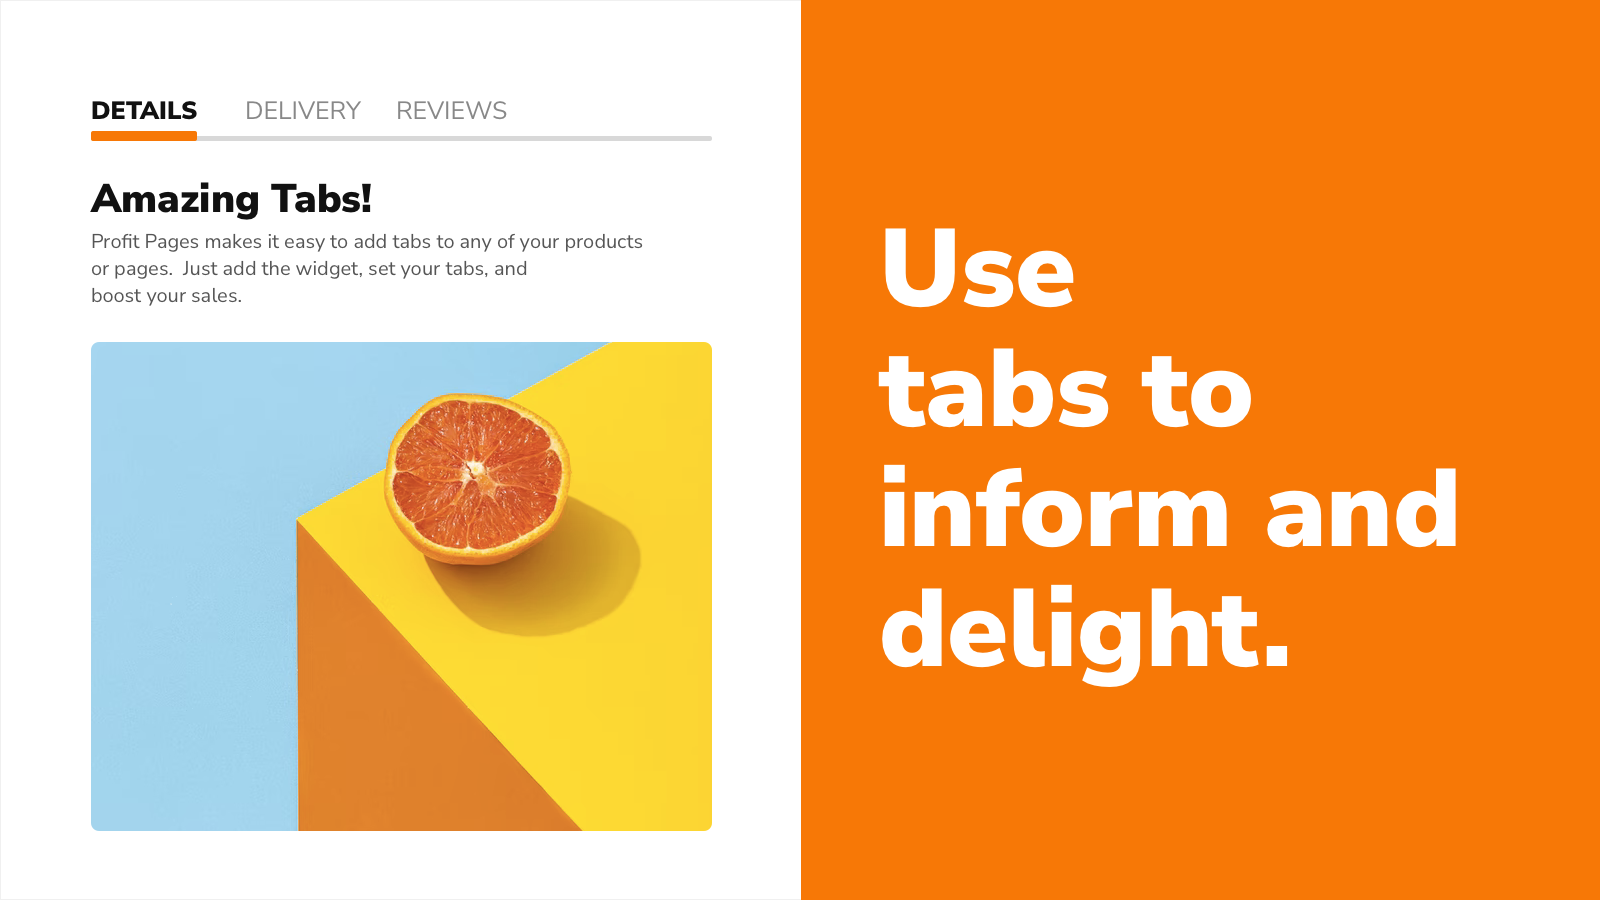 Use tabs to inform and delight.